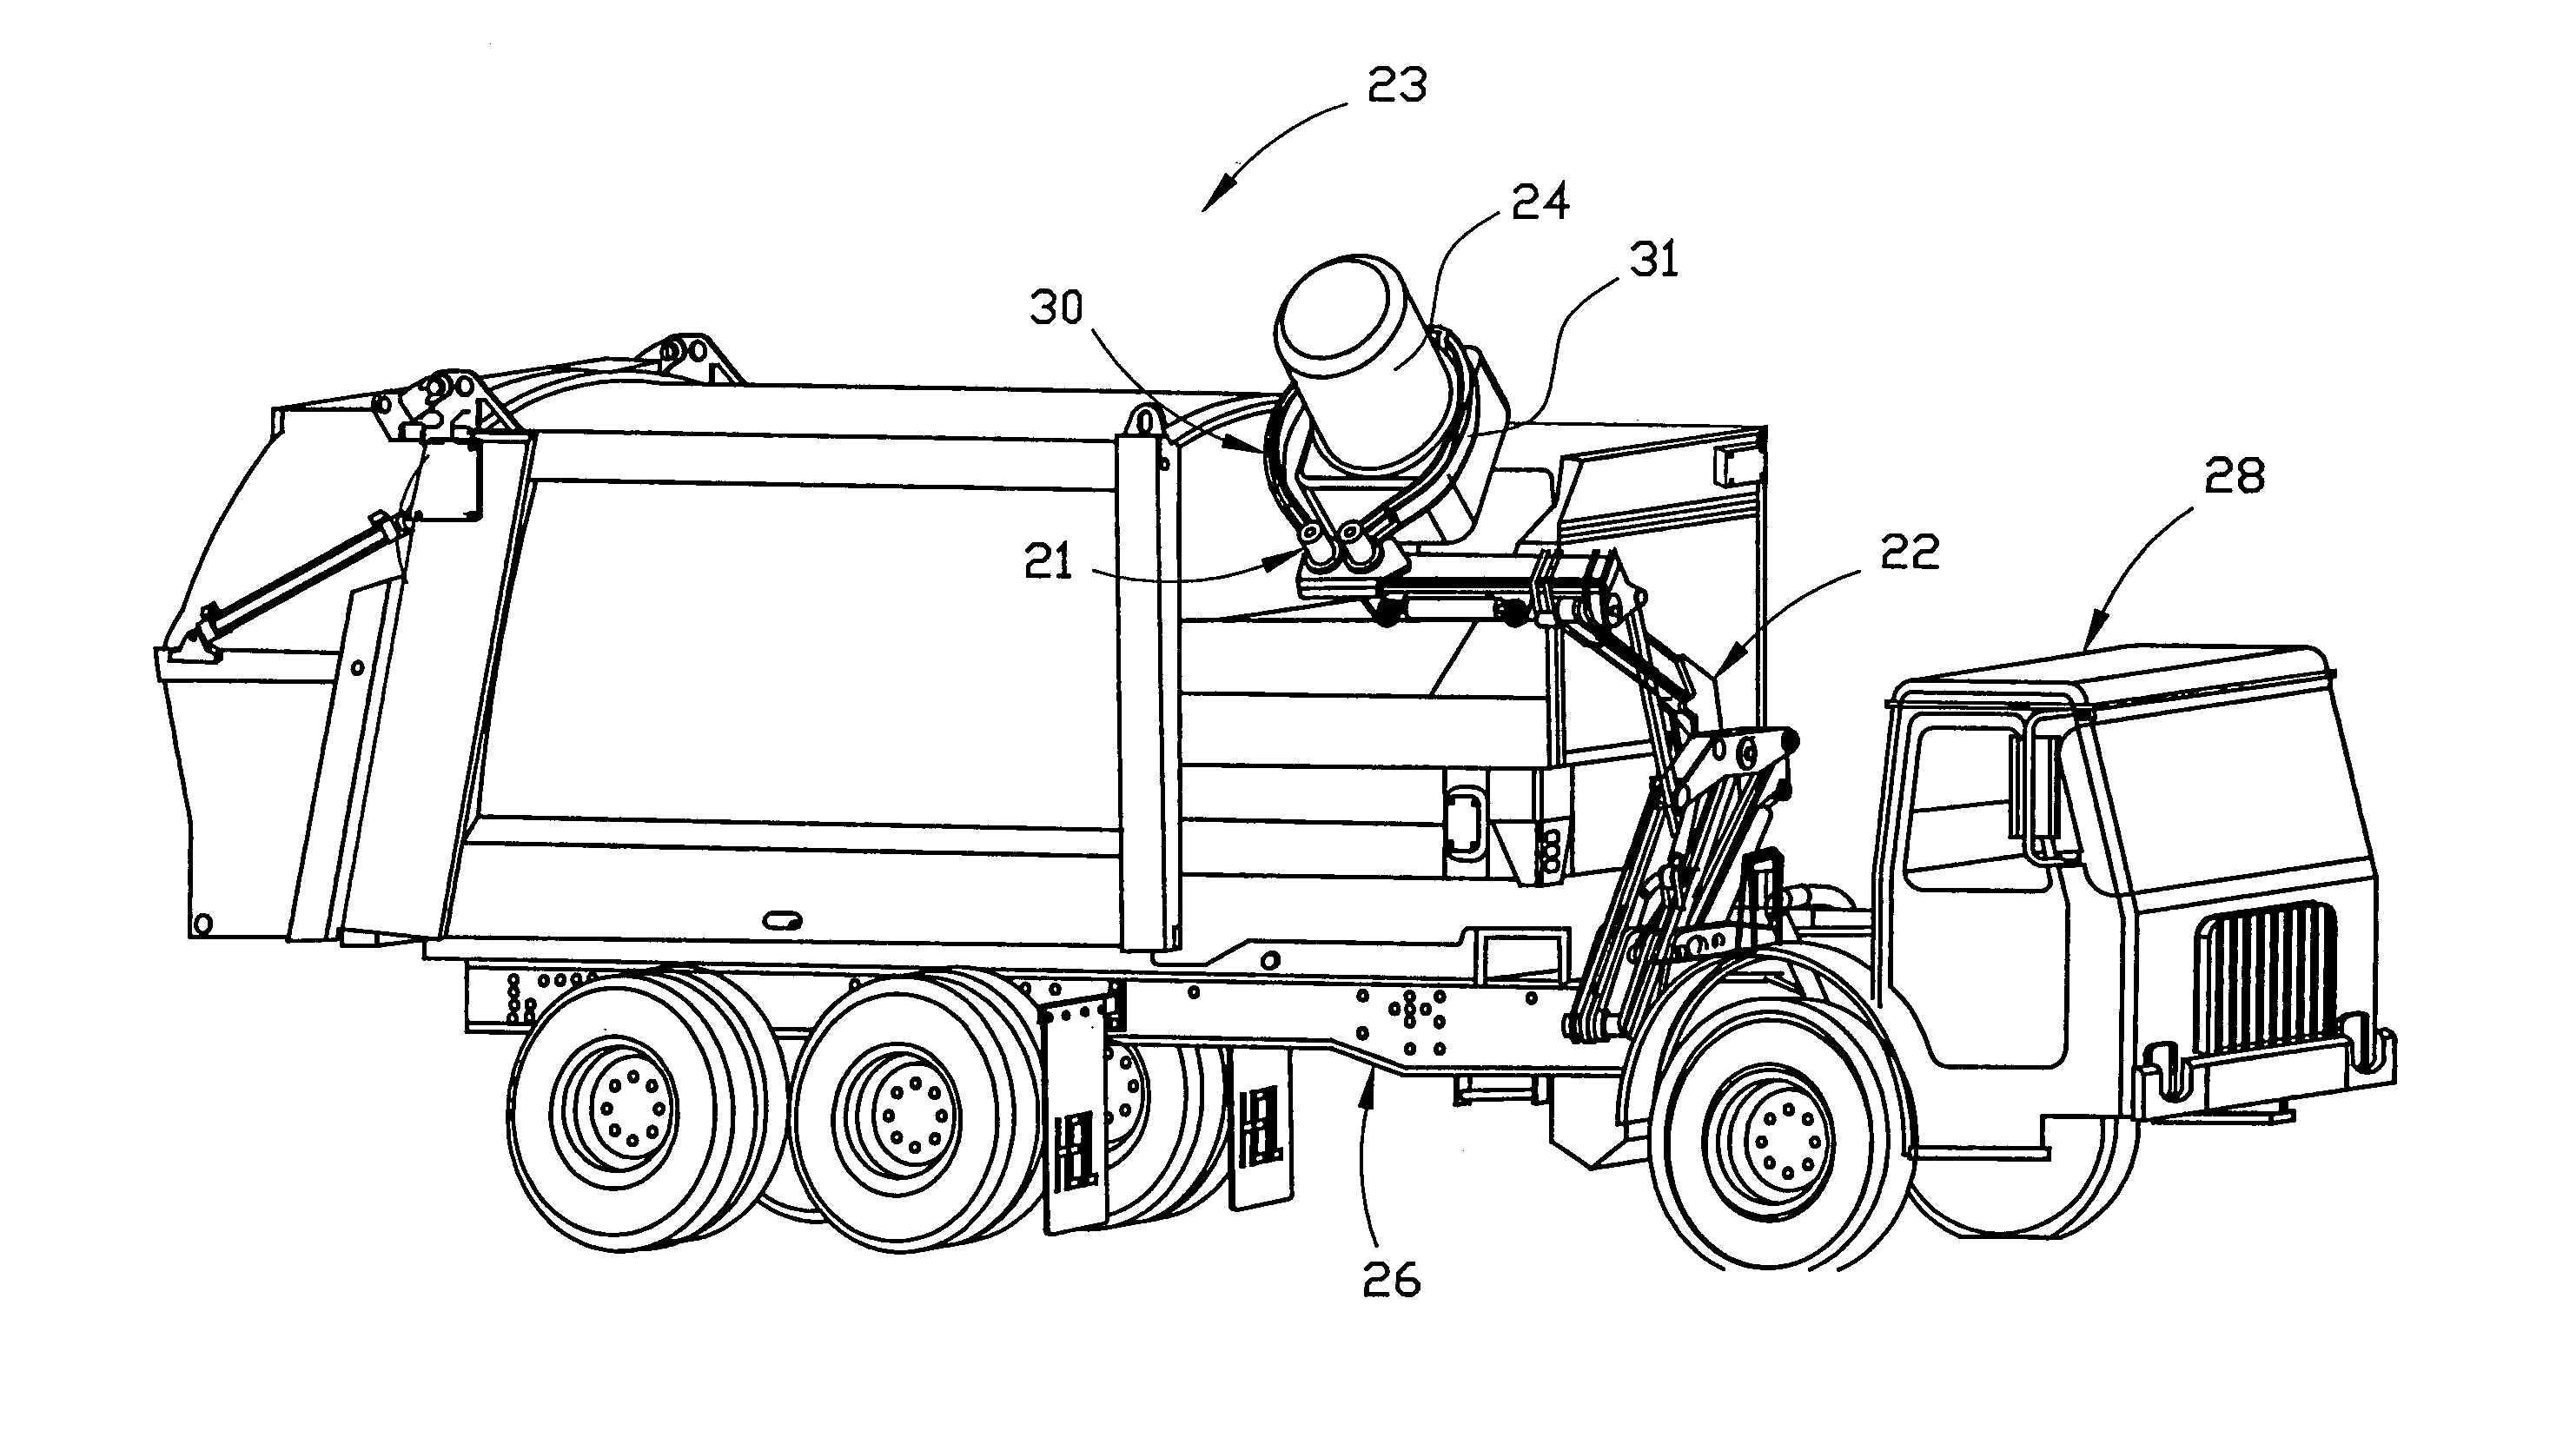 Refuse collection vehicle having multiple collection assemblies